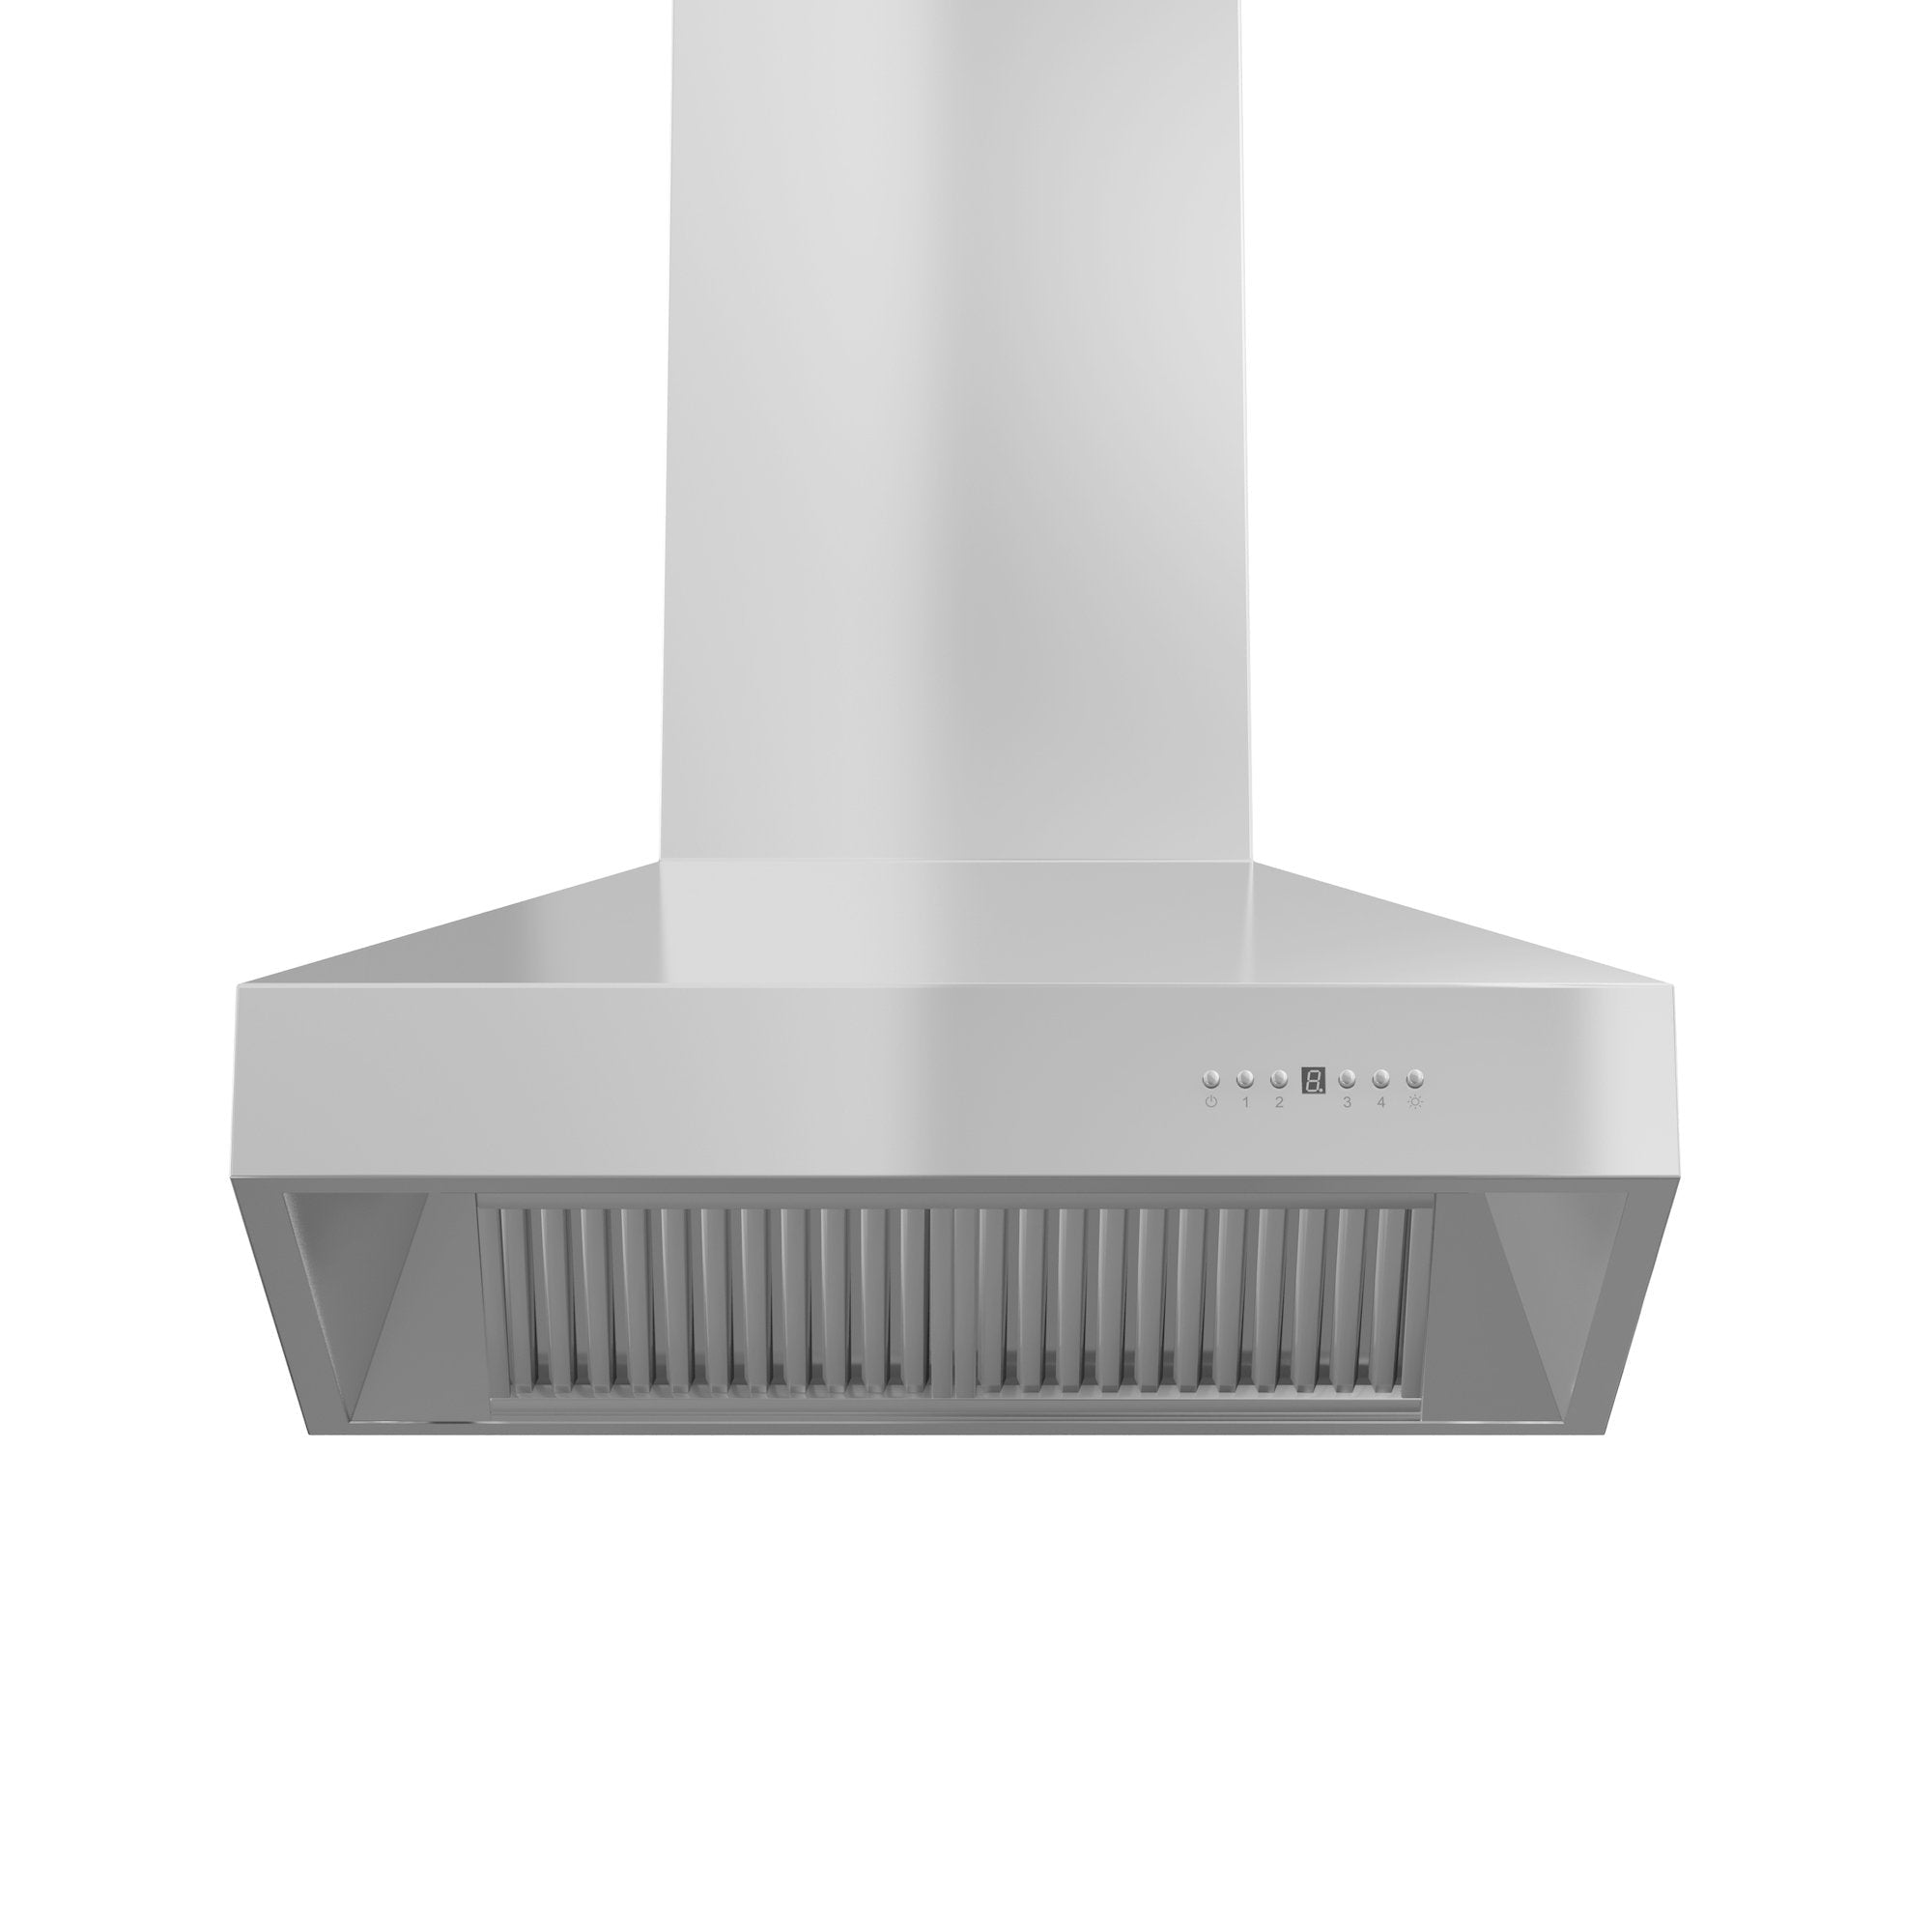 ZLINE Ducted Wall Mount Range Hood in Outdoor Approved Stainless Steel (697-304) front under showing baffle filters.